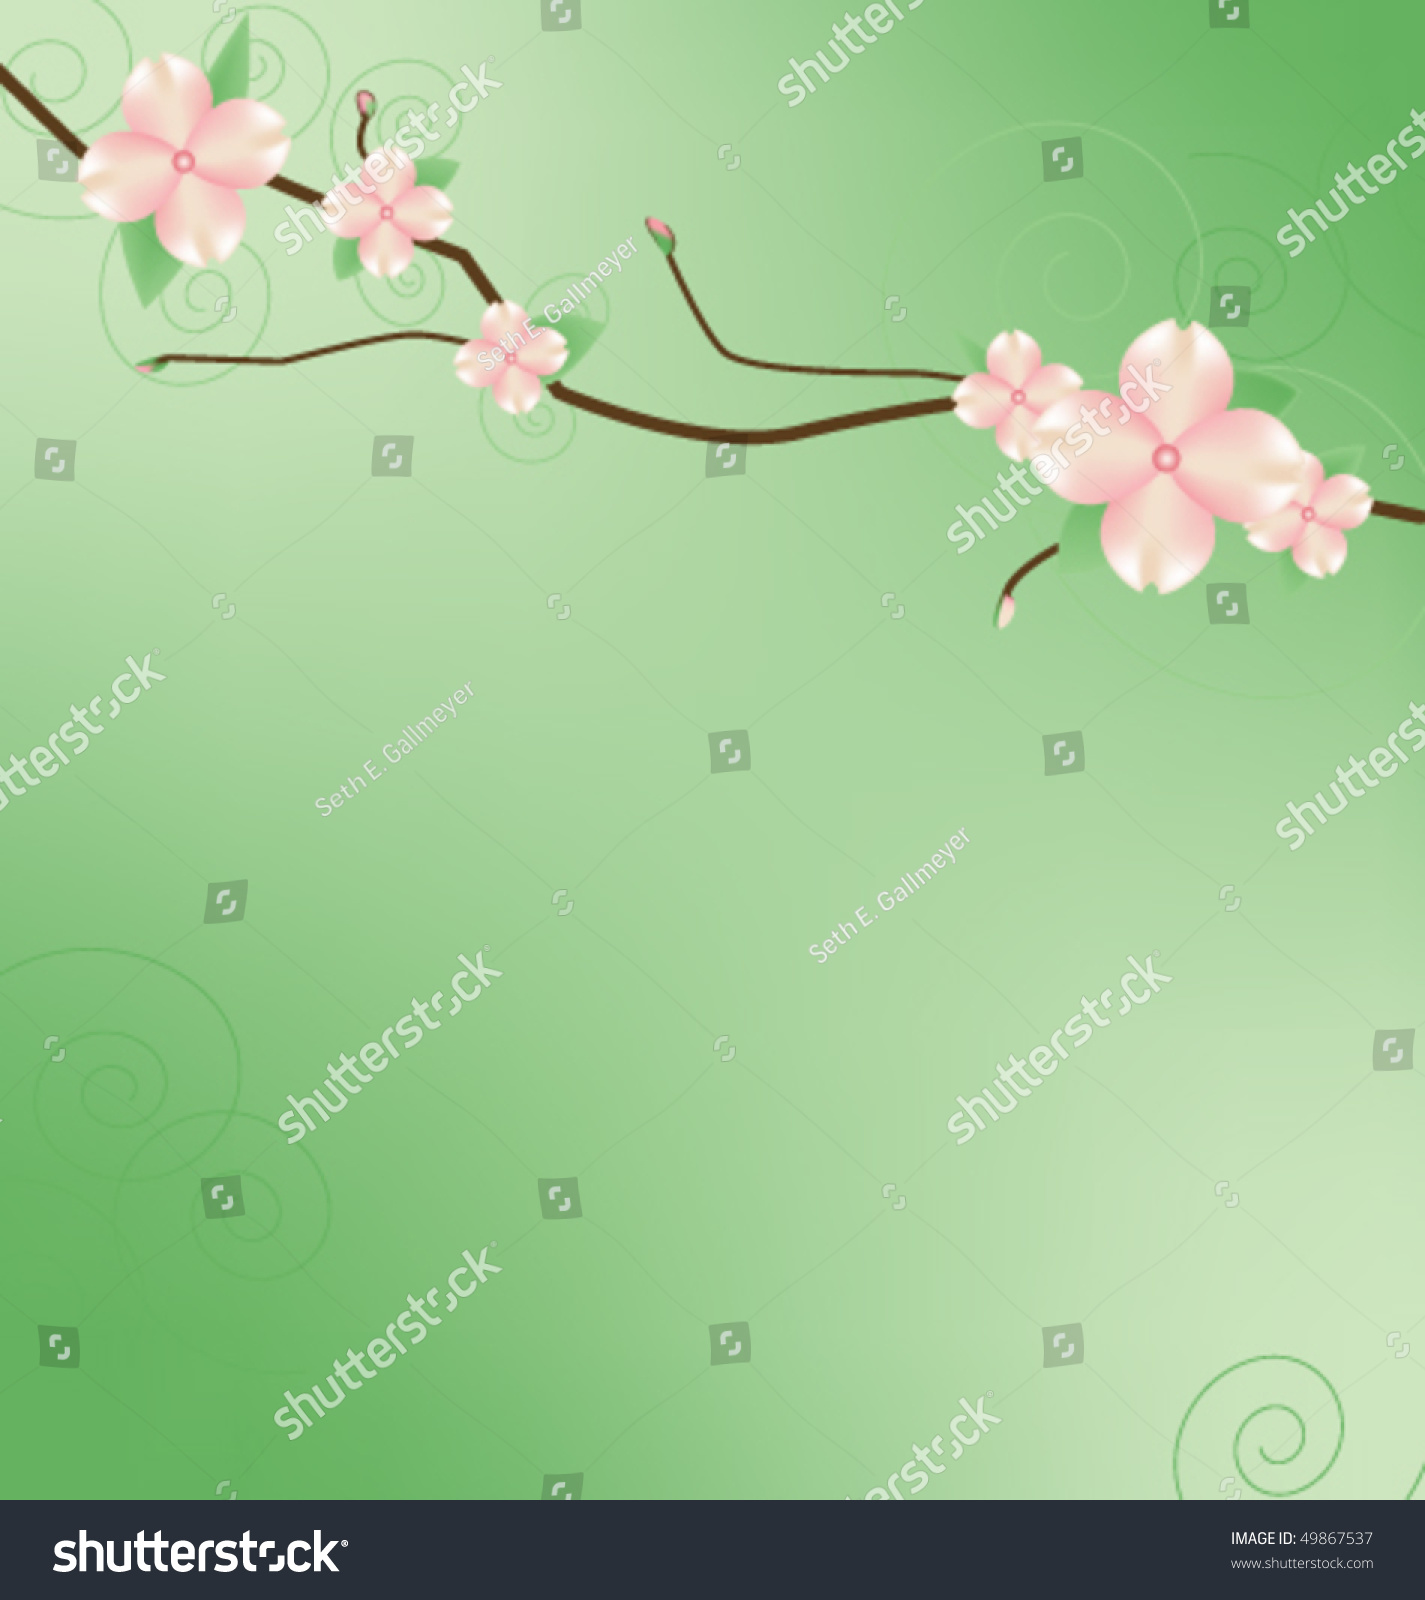 SVG of Branch with Dogwood looking blossoms. svg